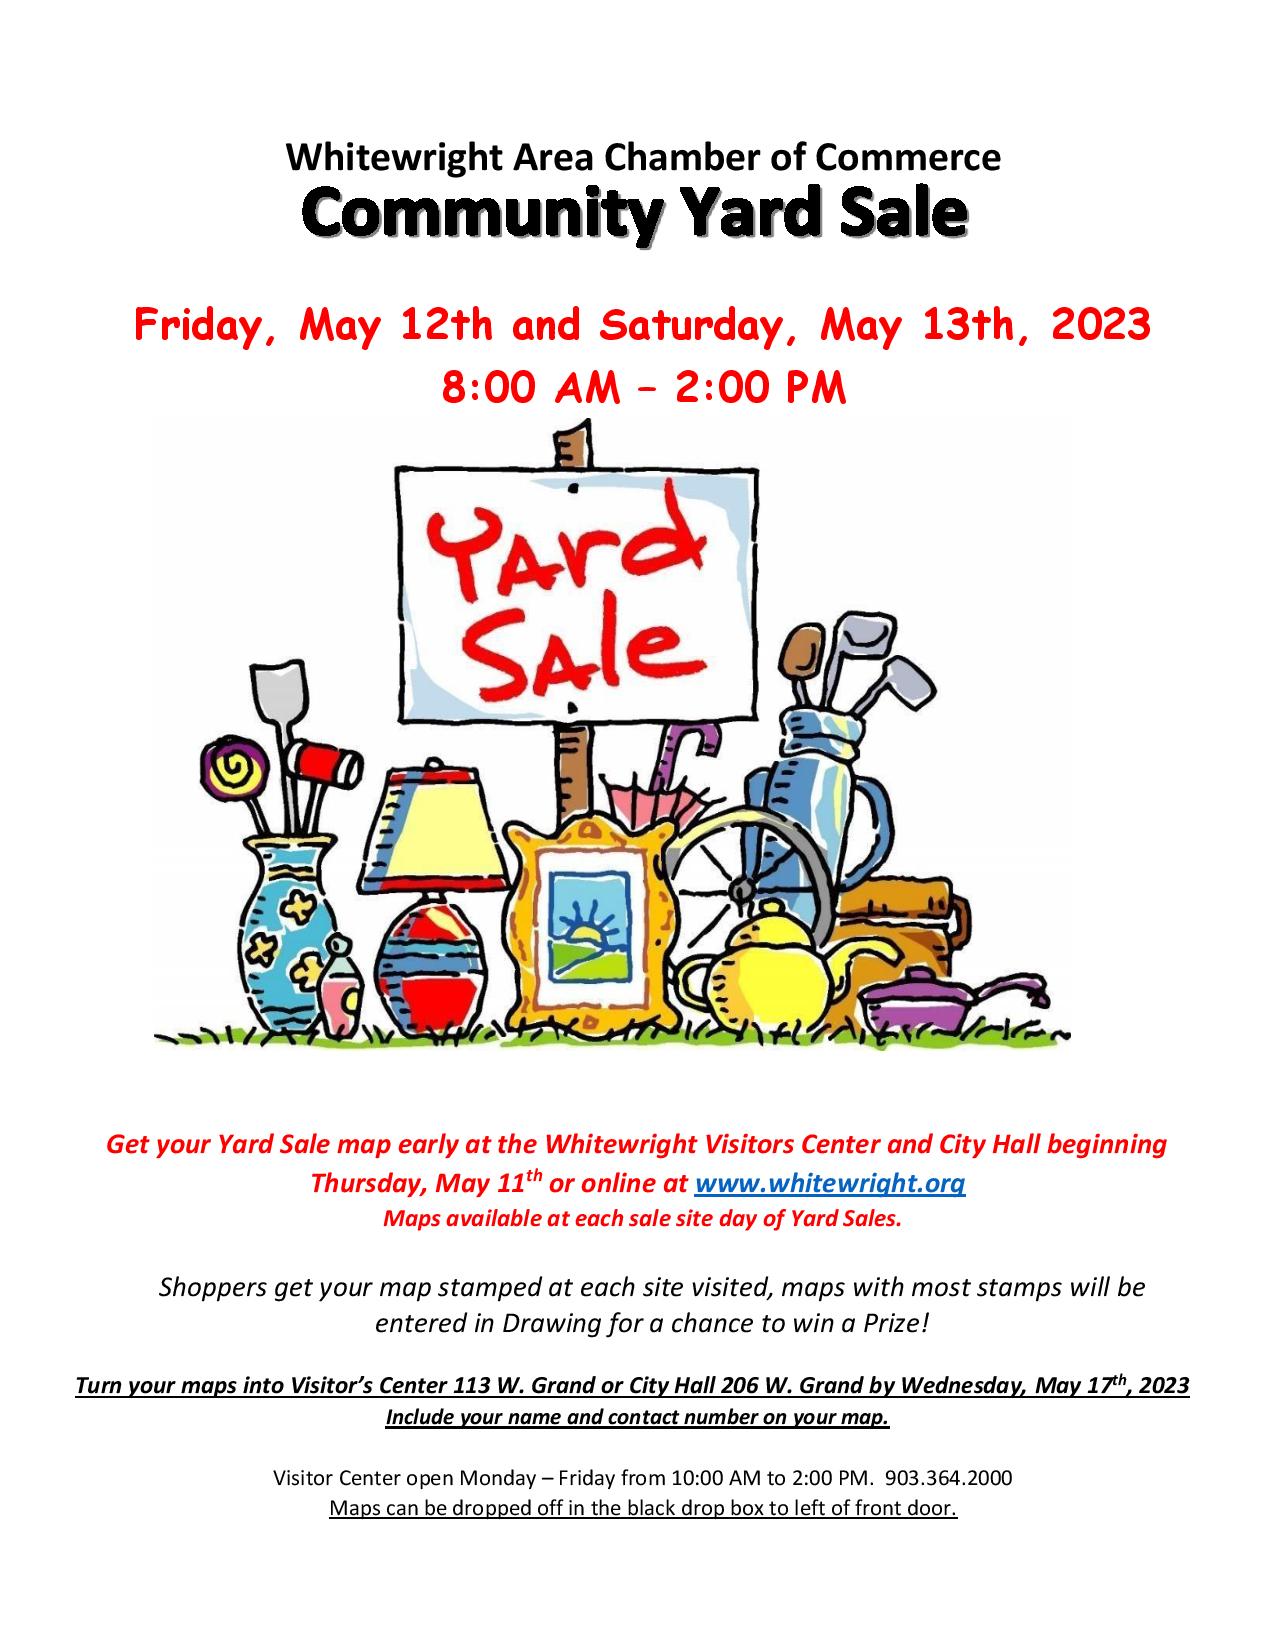 Whitewright Area Chamber of Commerce - COMMUNITY WIDE YARD SALE - May 12th & 13th